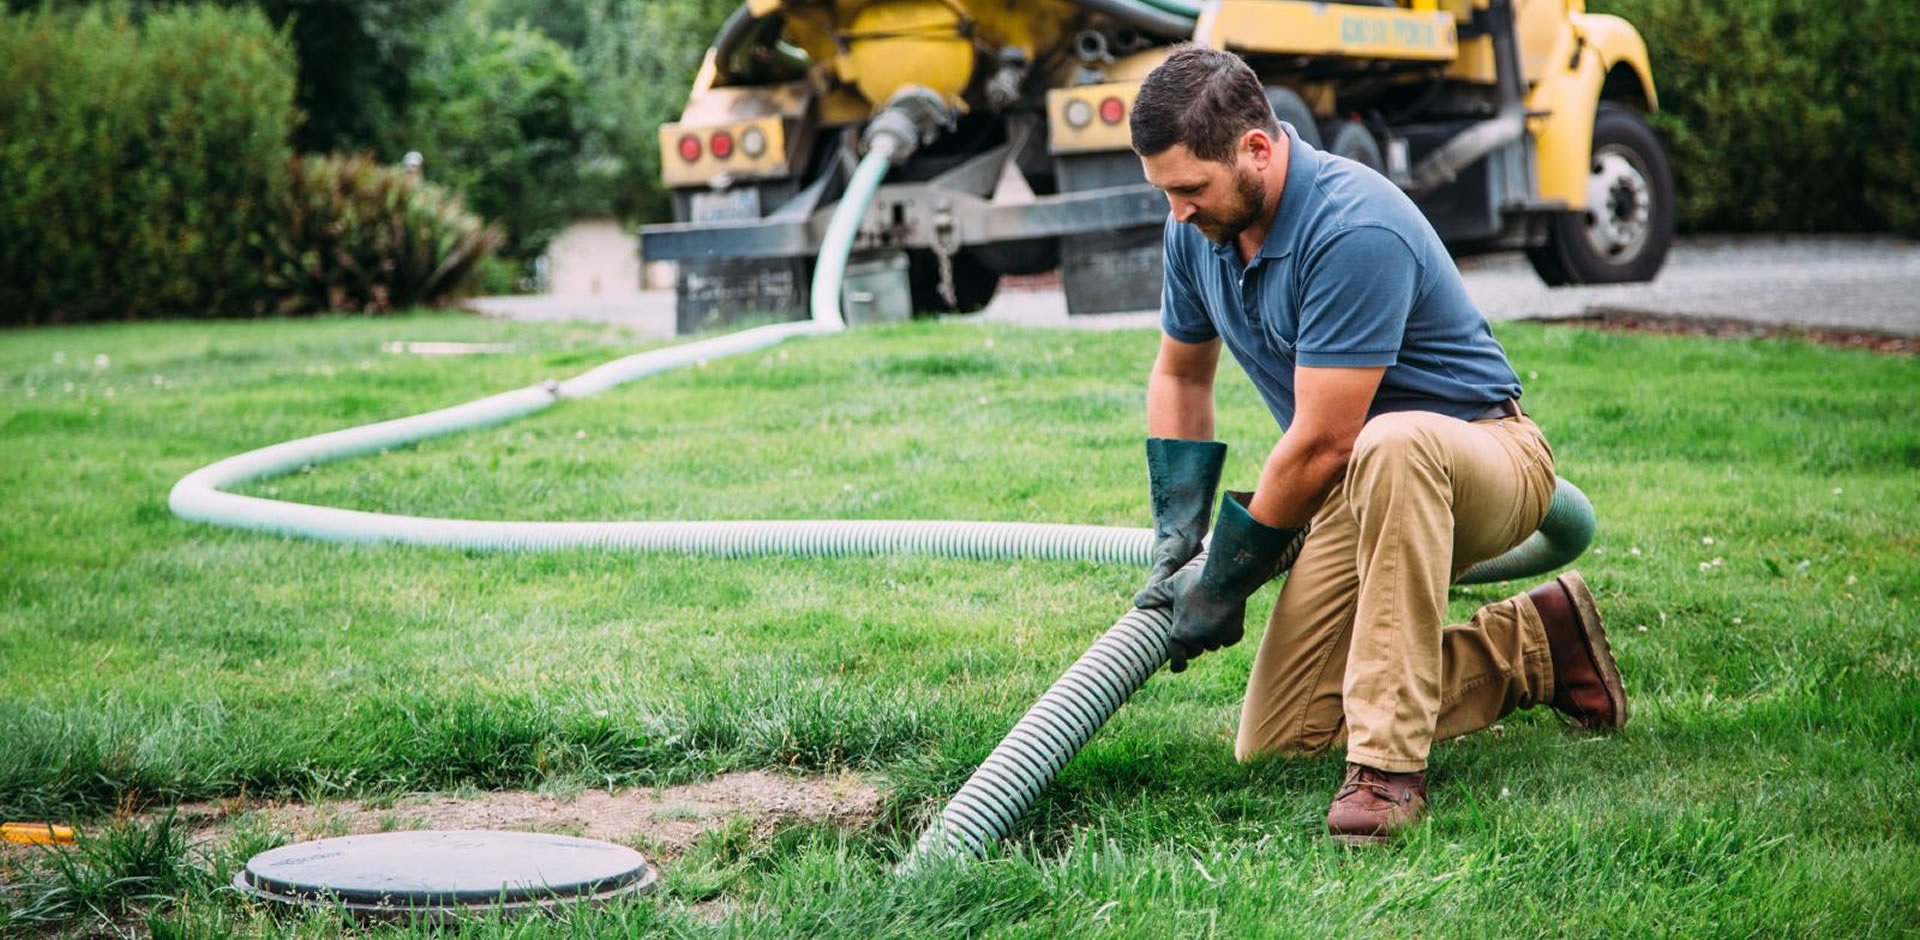 Get the high-quality septic tank pumping service you need